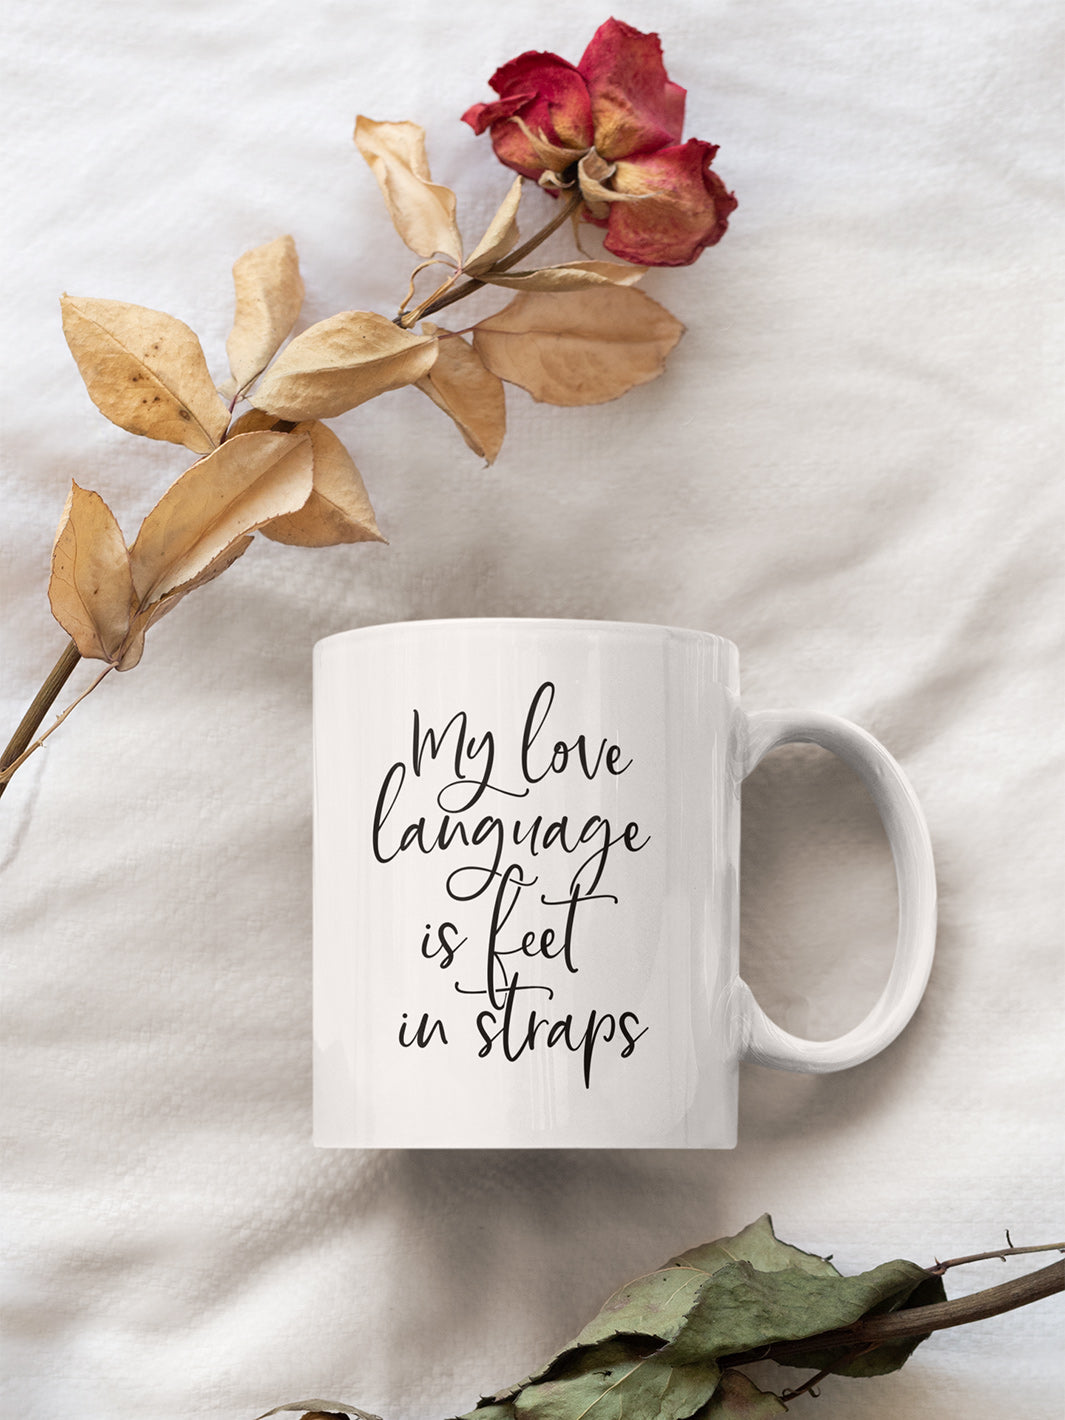 White 11oz coffee mug against a white background with dried roses that said "My Love Language Is Feet In Straps" black script  